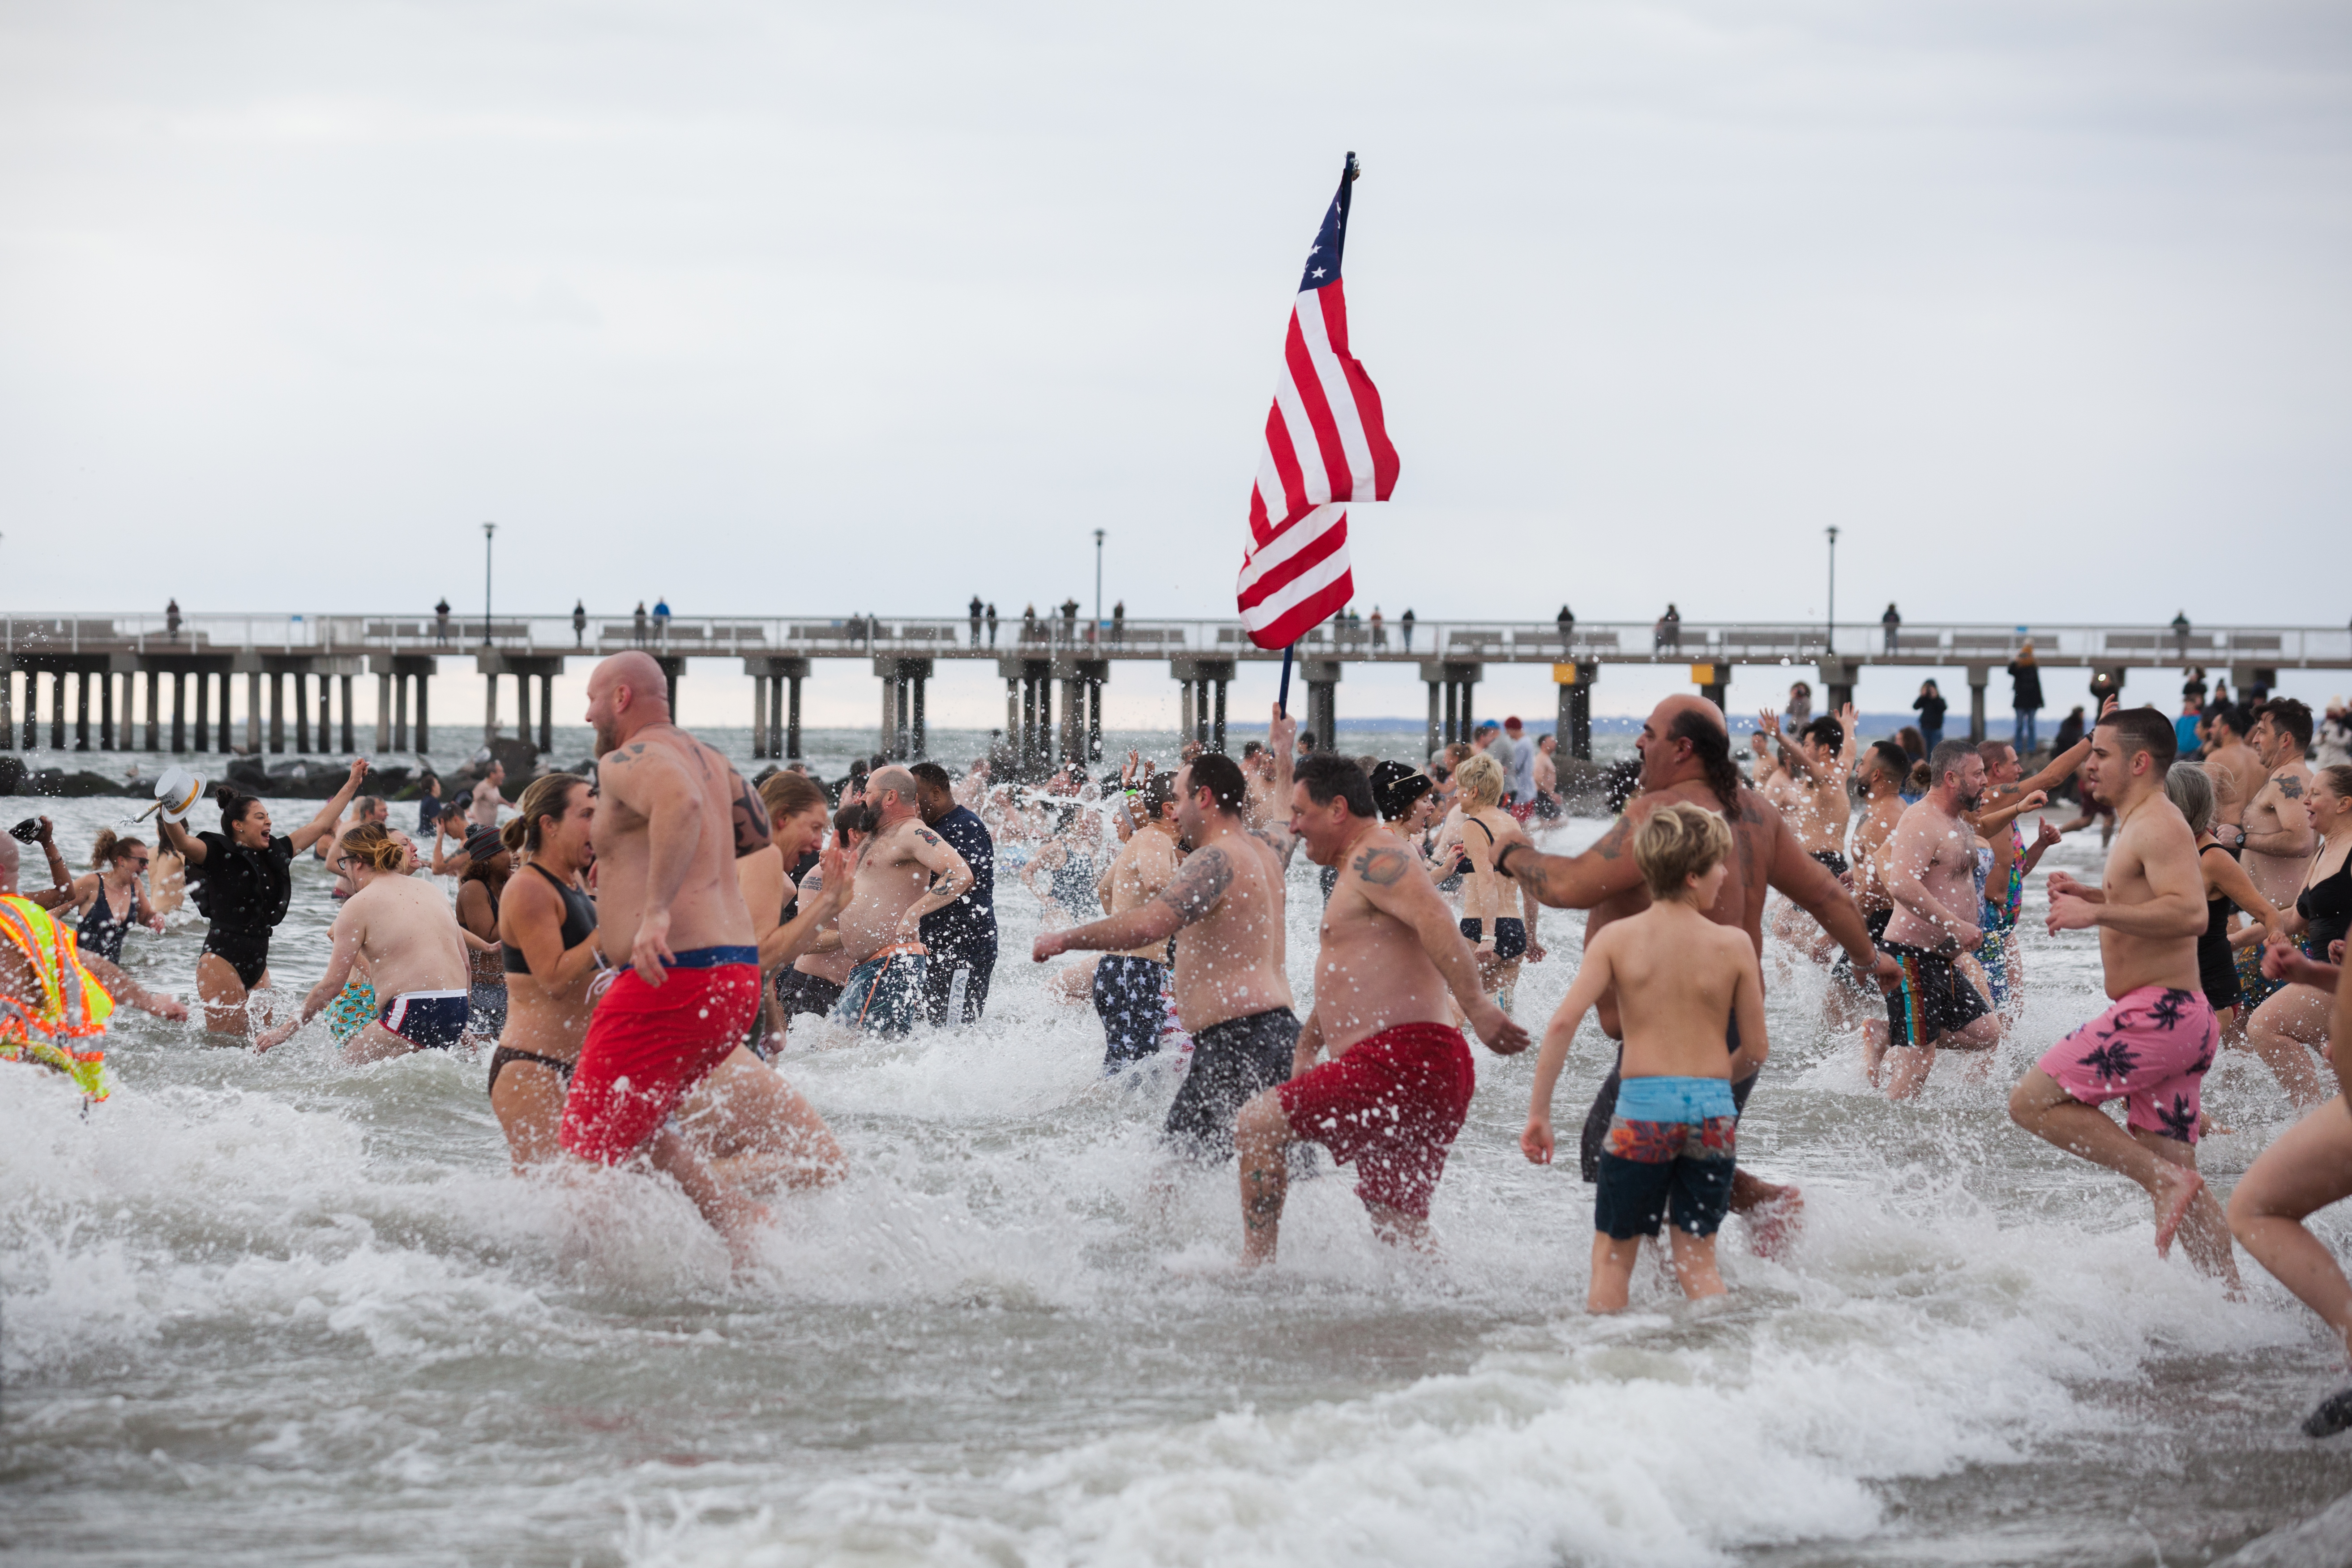 A crowd of spectators turned into participants when they ran into the water as well.